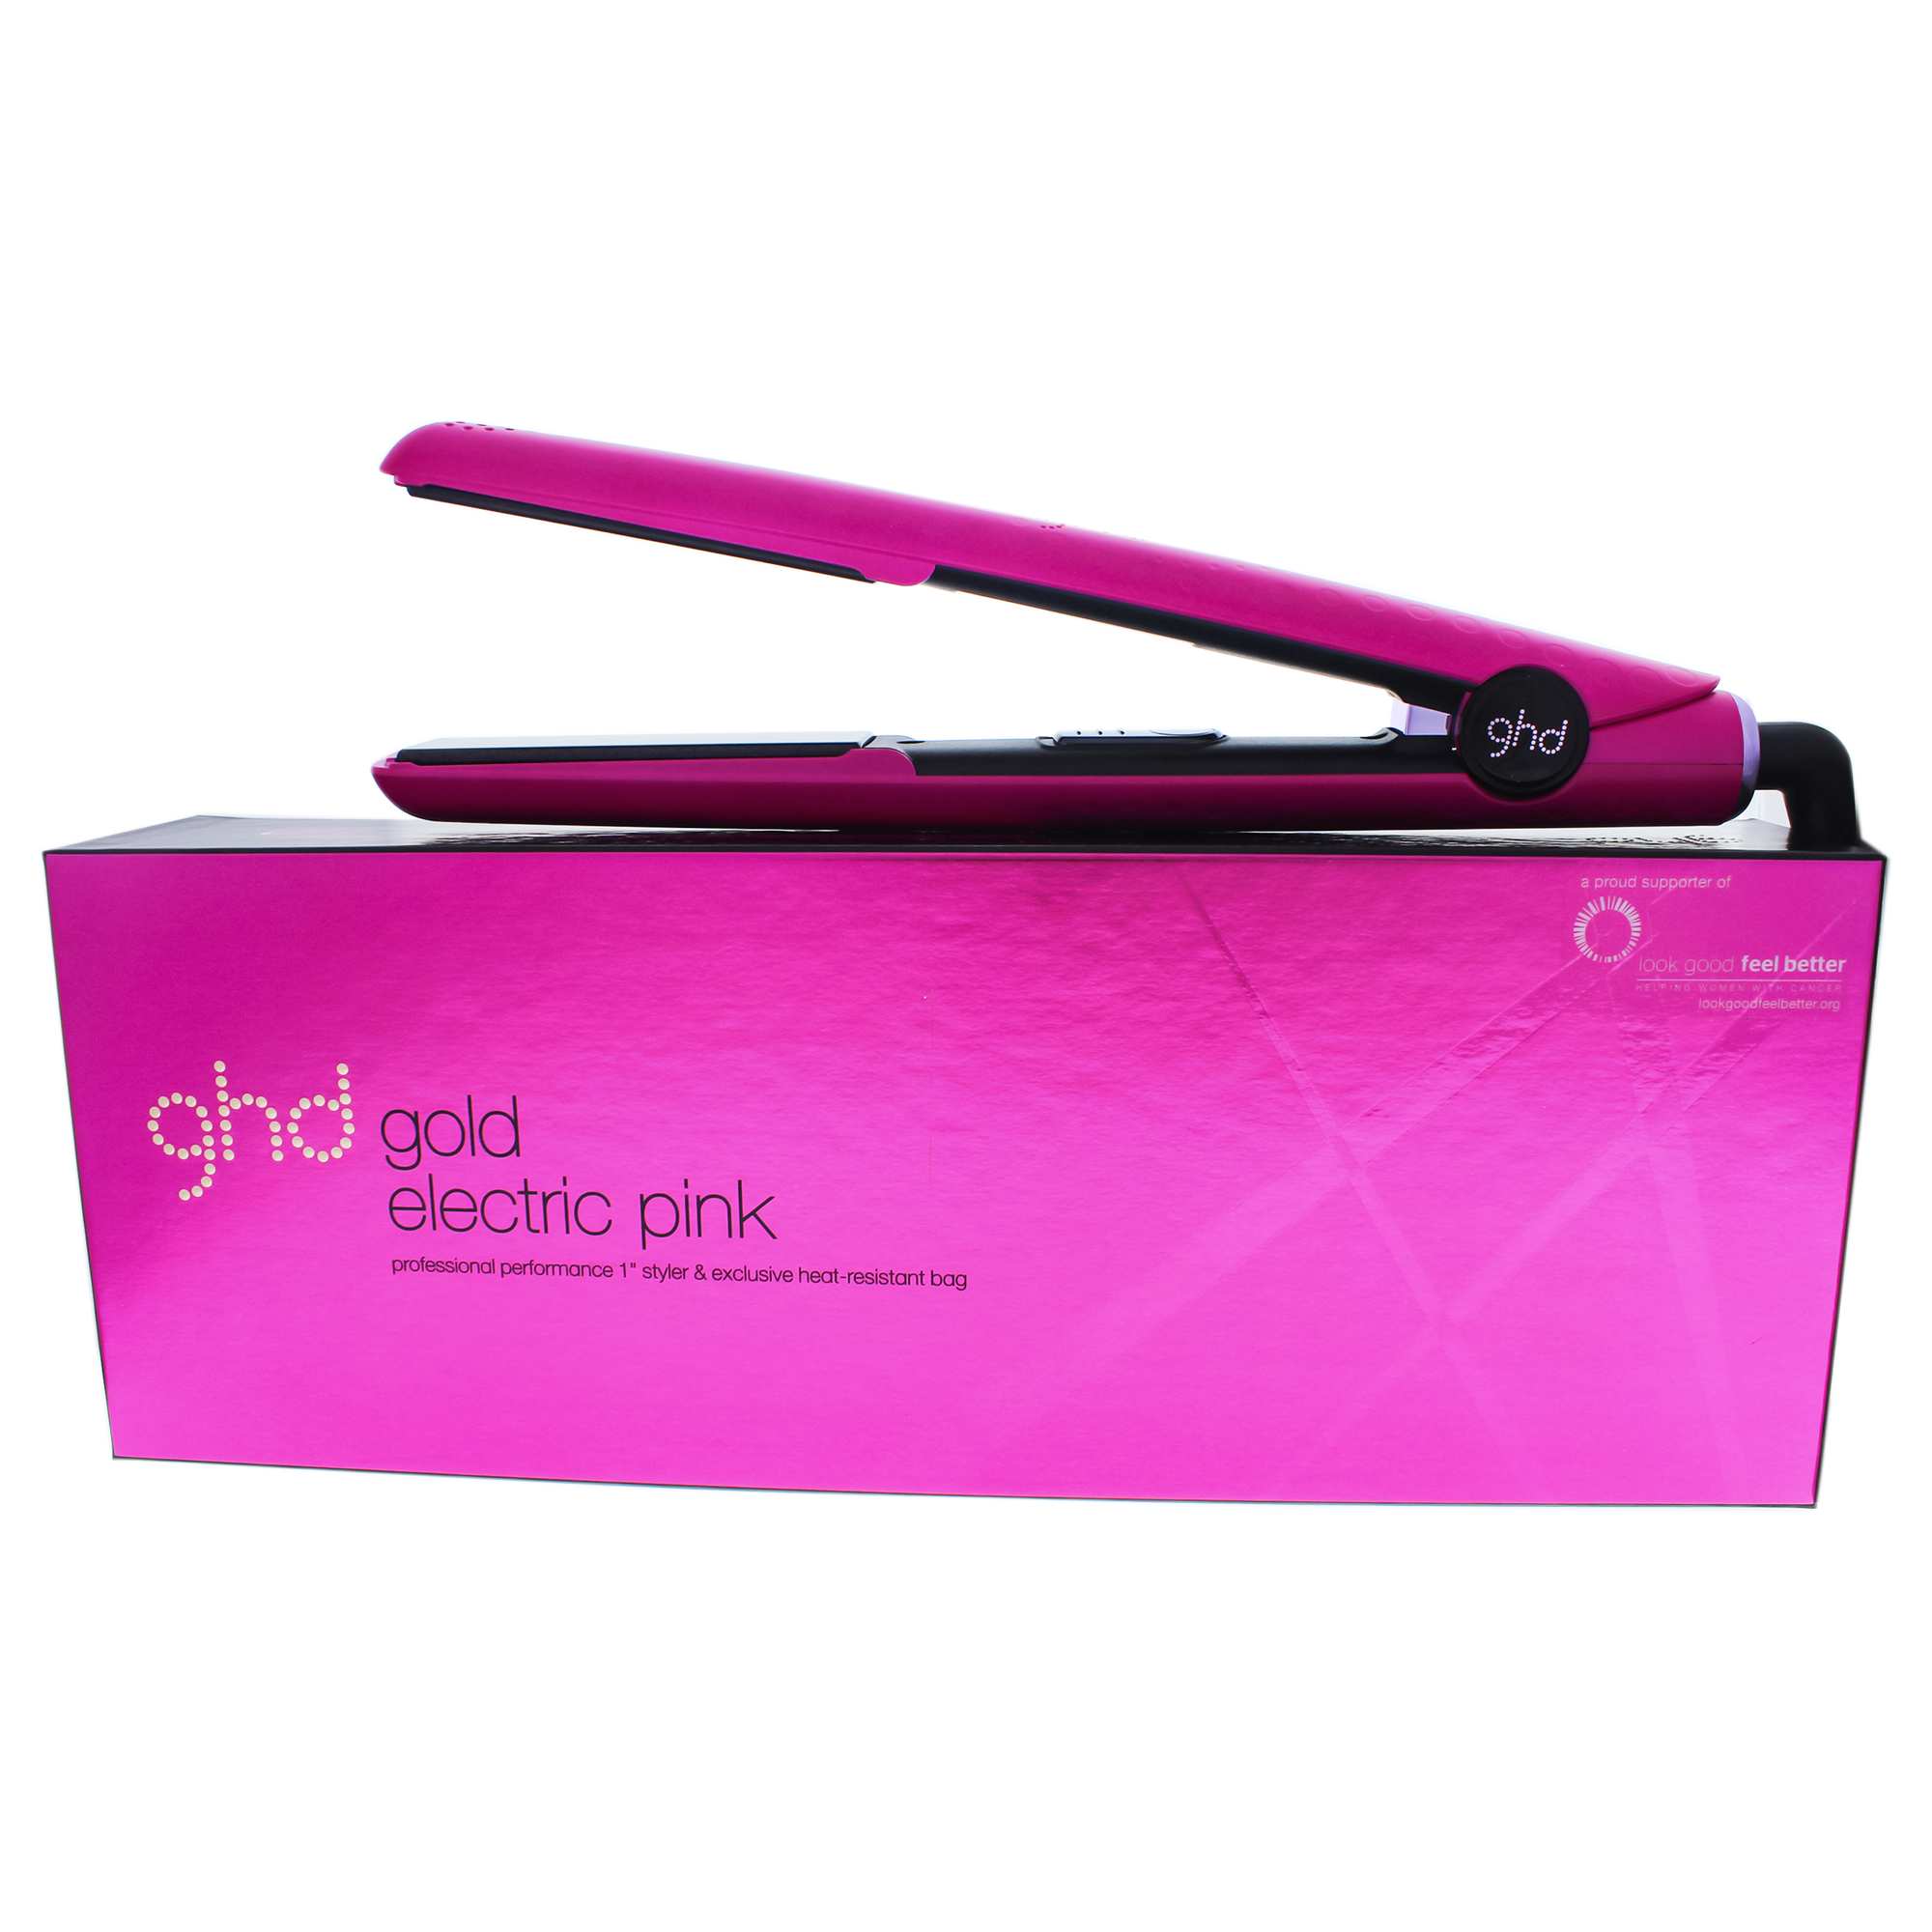 GHD Electric Pink Gold Styler Flat Iron, 1" - image 2 of 10